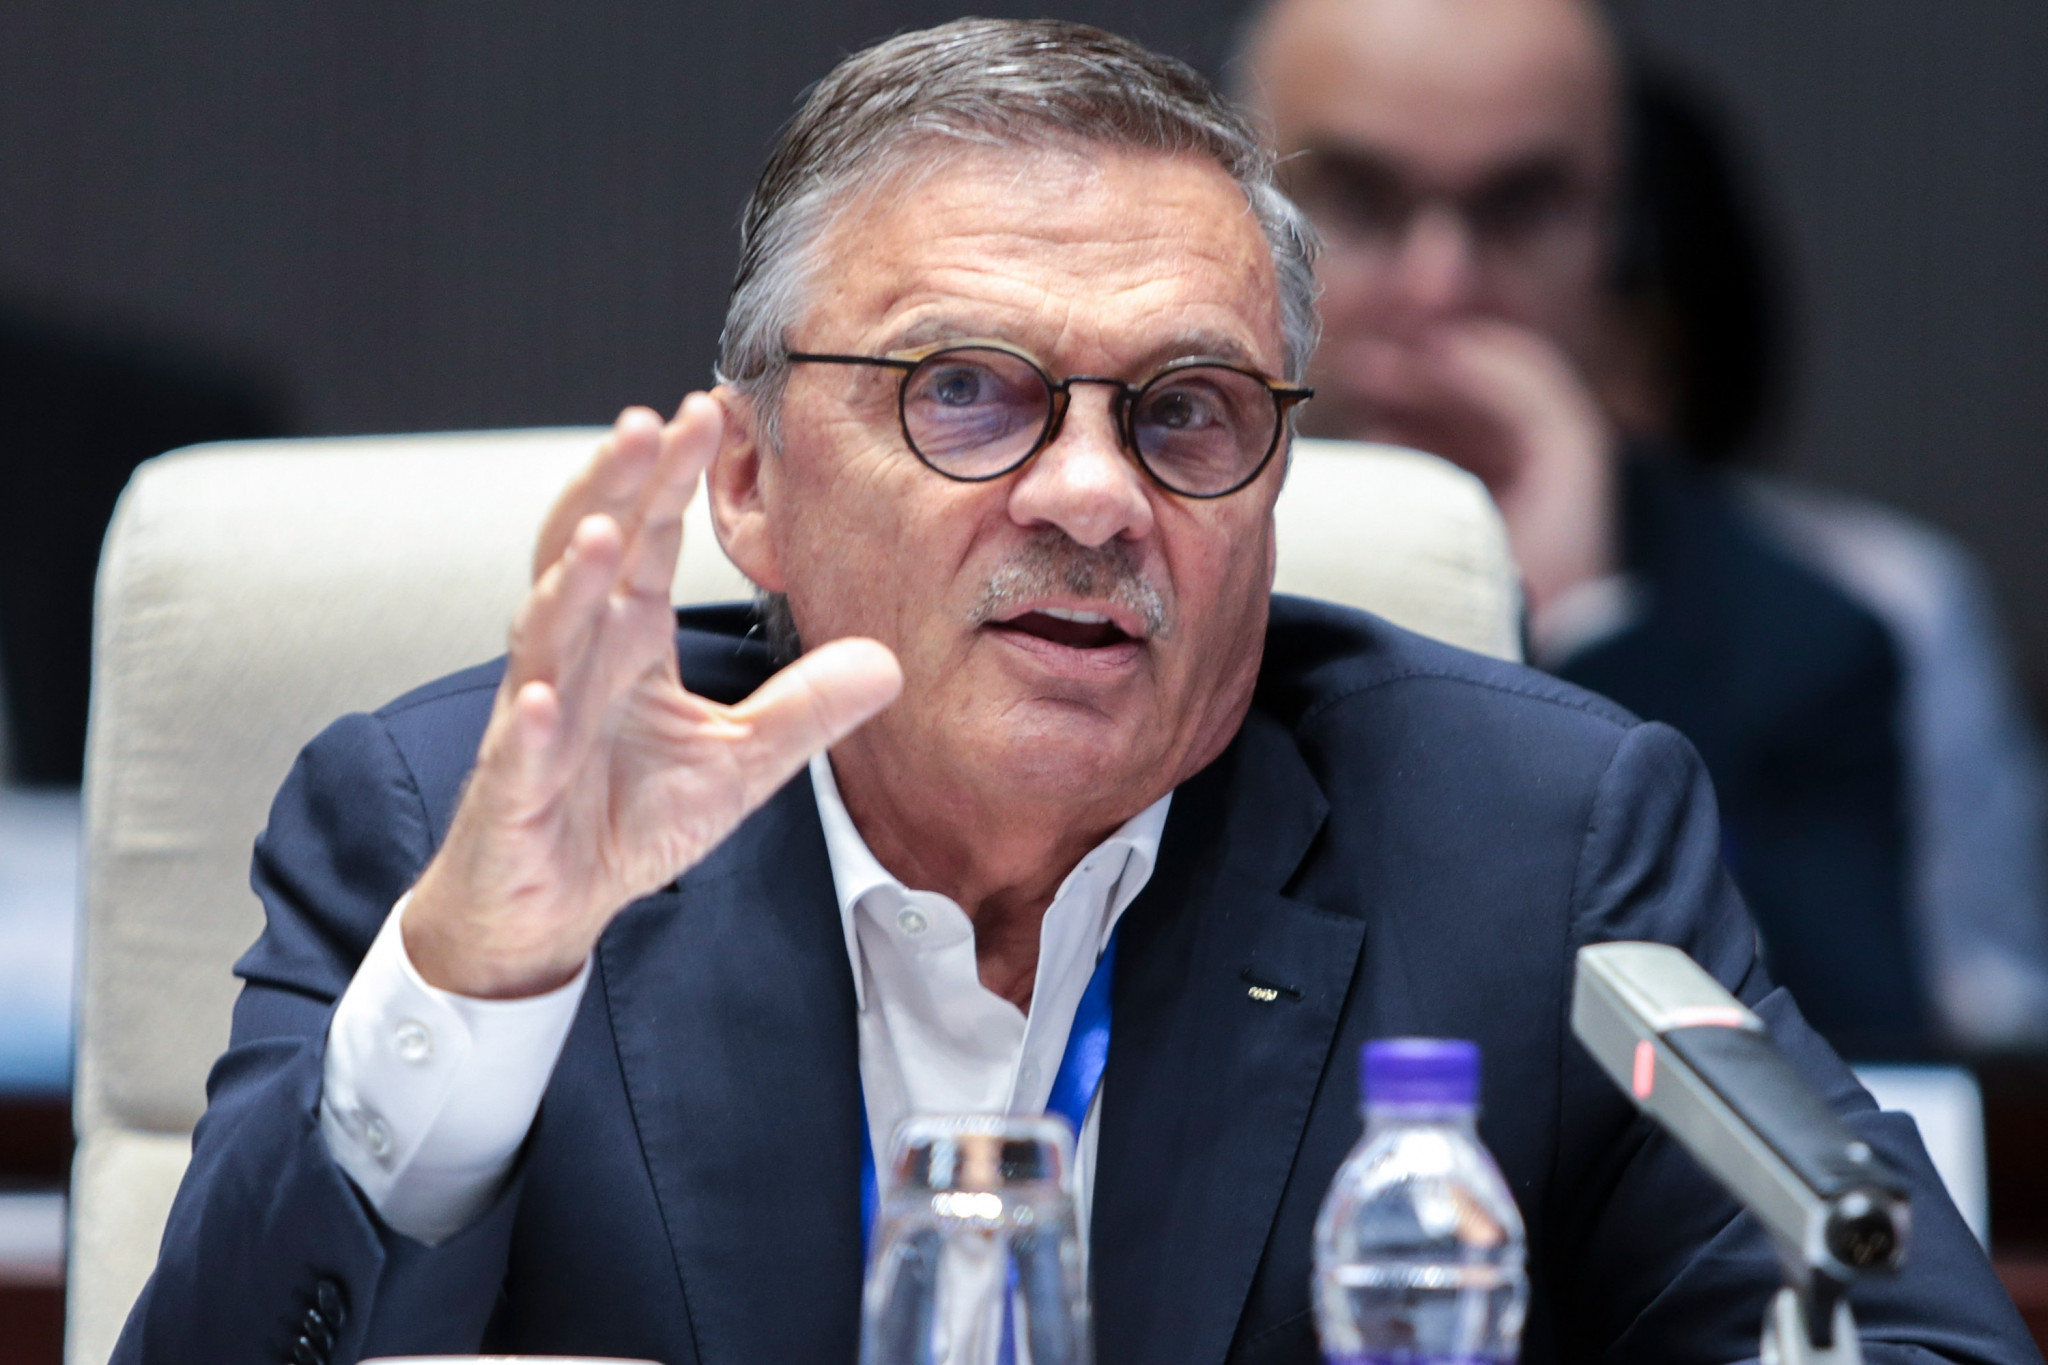 International Ice Hockey Federation President René Fasel has suggested he could work in Russia when he steps down from his role next year ©Getty Images